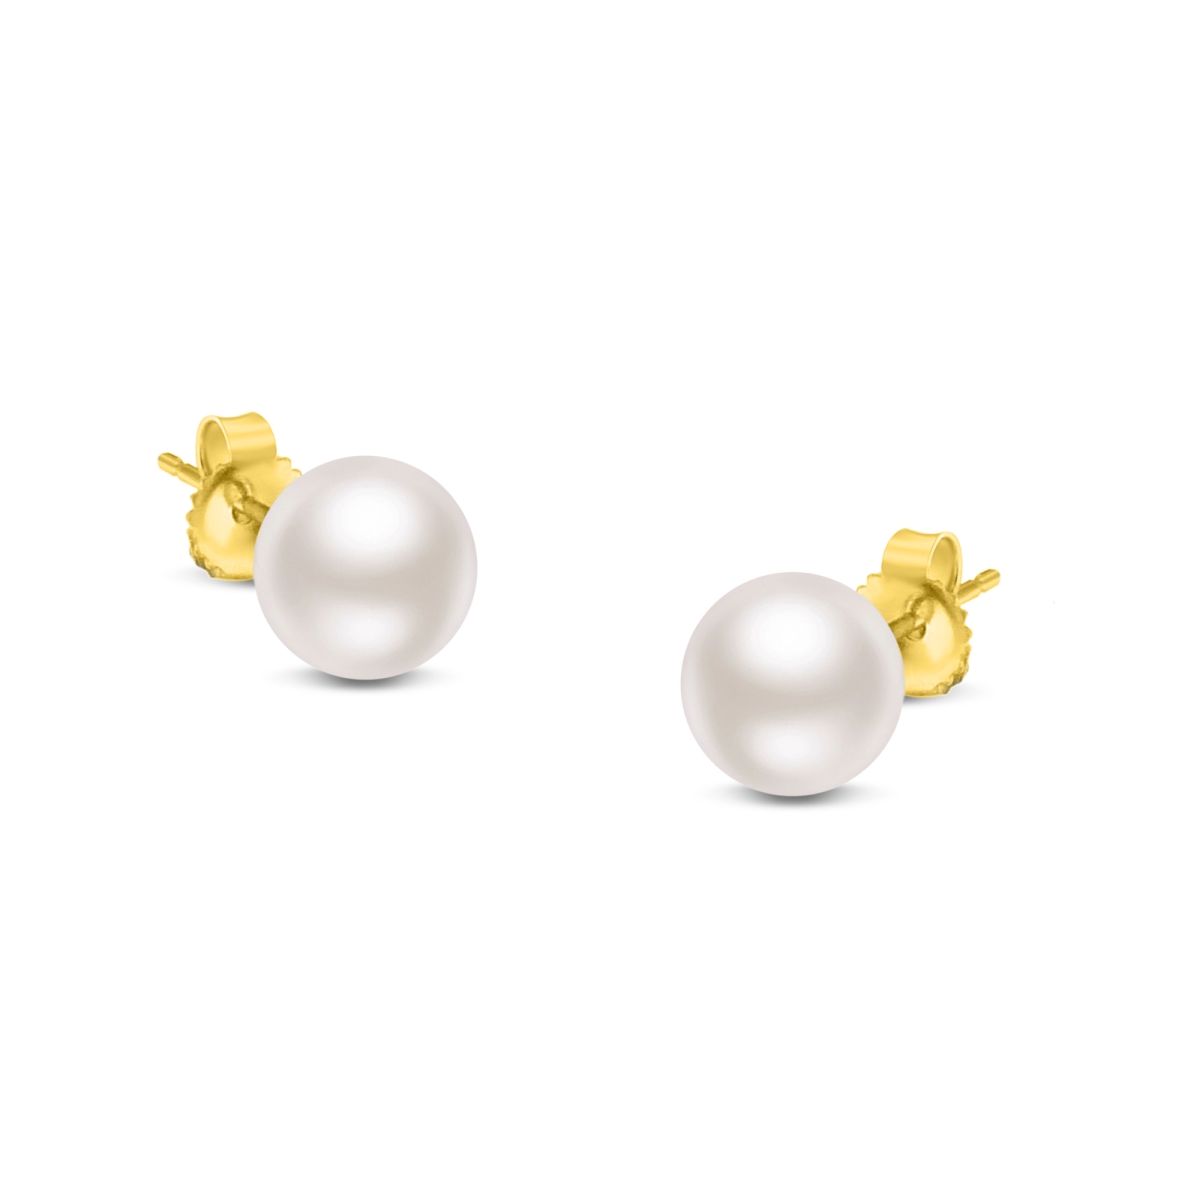 Infinite Jewels 018310ES35 14K Yellow Gold Round White 7.5-8.0 mm Saltwater Akoya Cultured Pearl Stud Earrings for AAA plus Quality